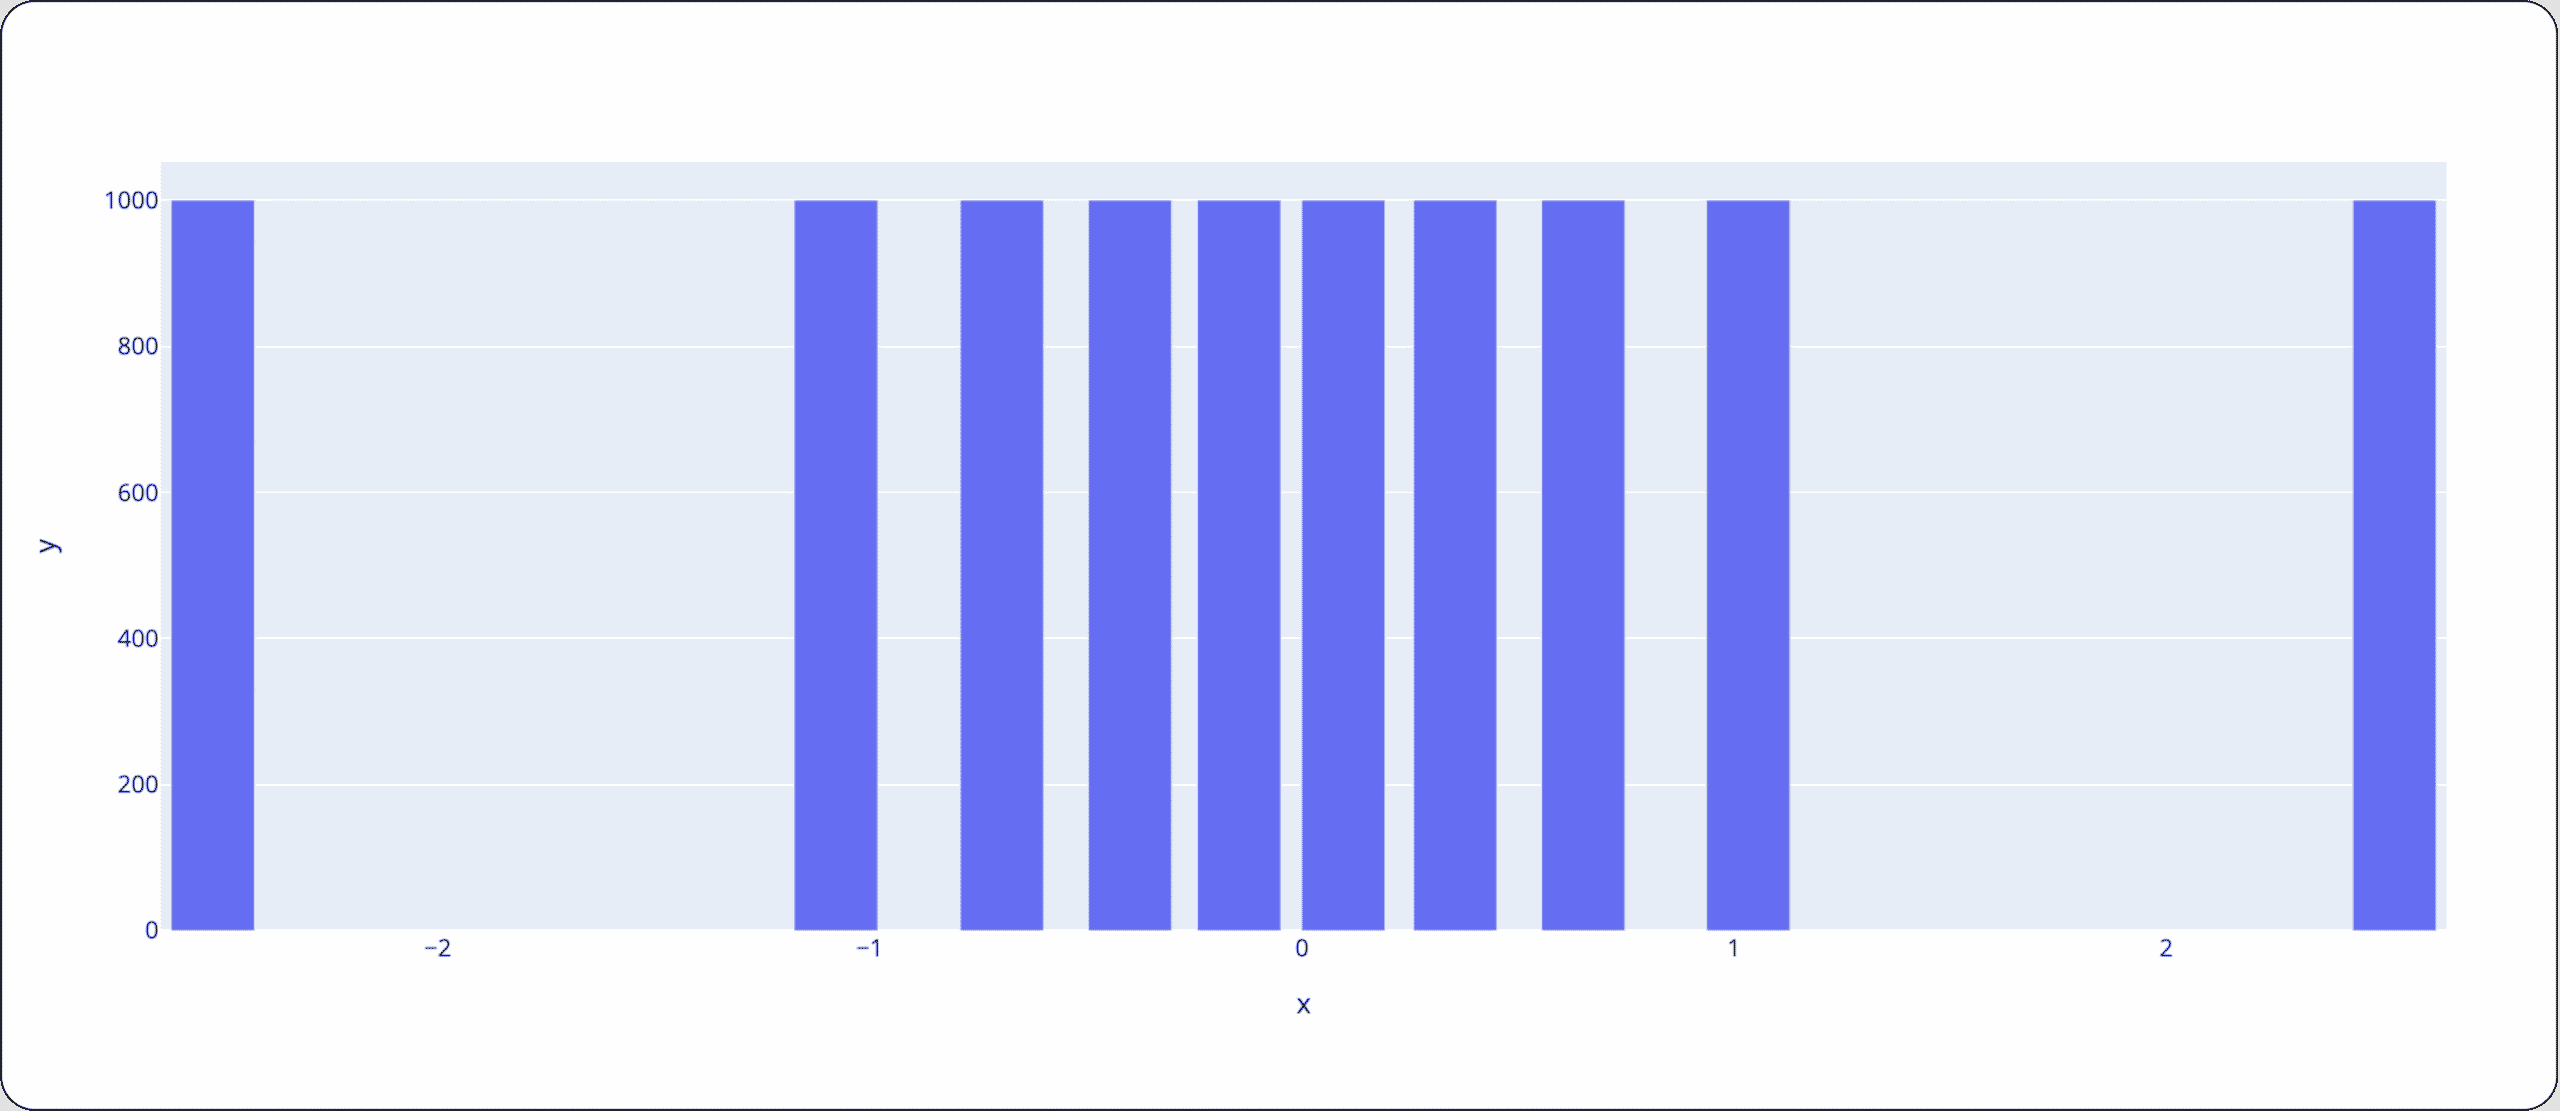 Same distribution, but this time the histogram is with 10 bins where each bin represents a percentile.